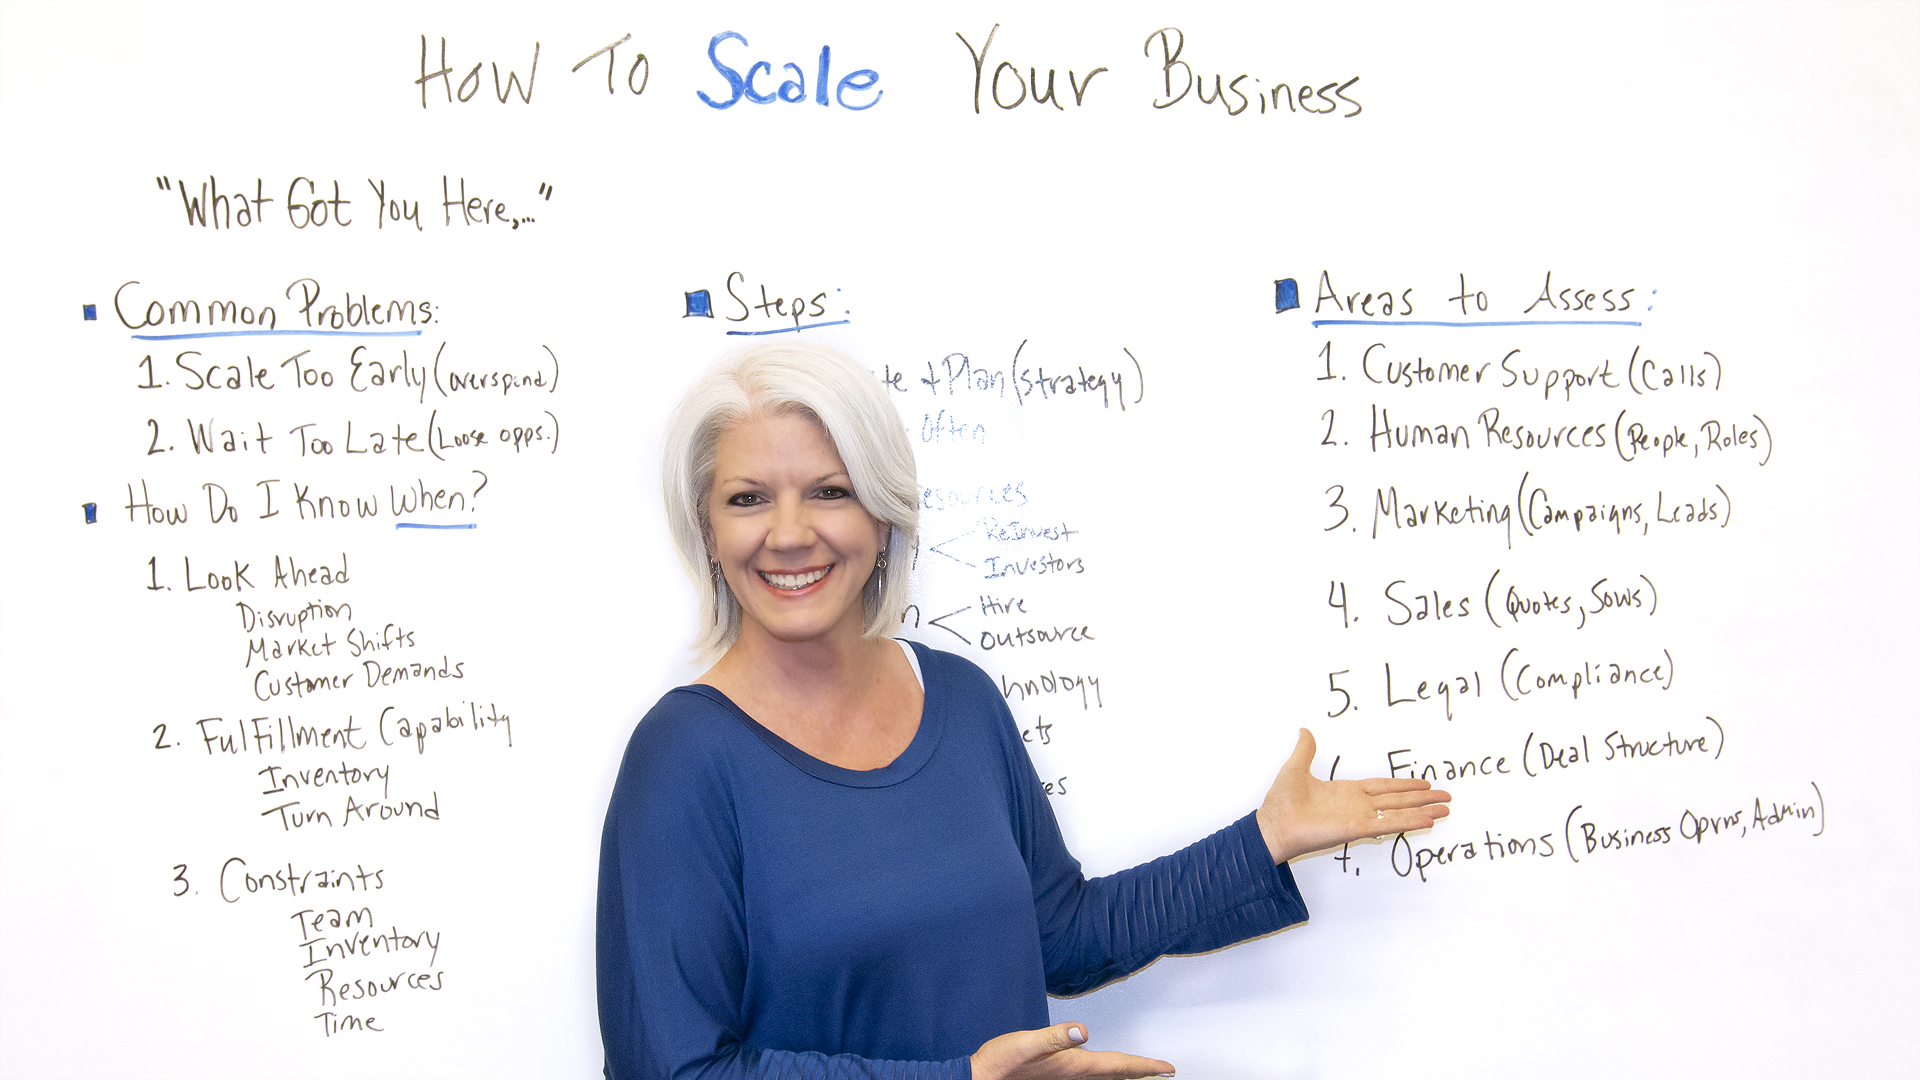 How to scale your business in full-employment - DashThis